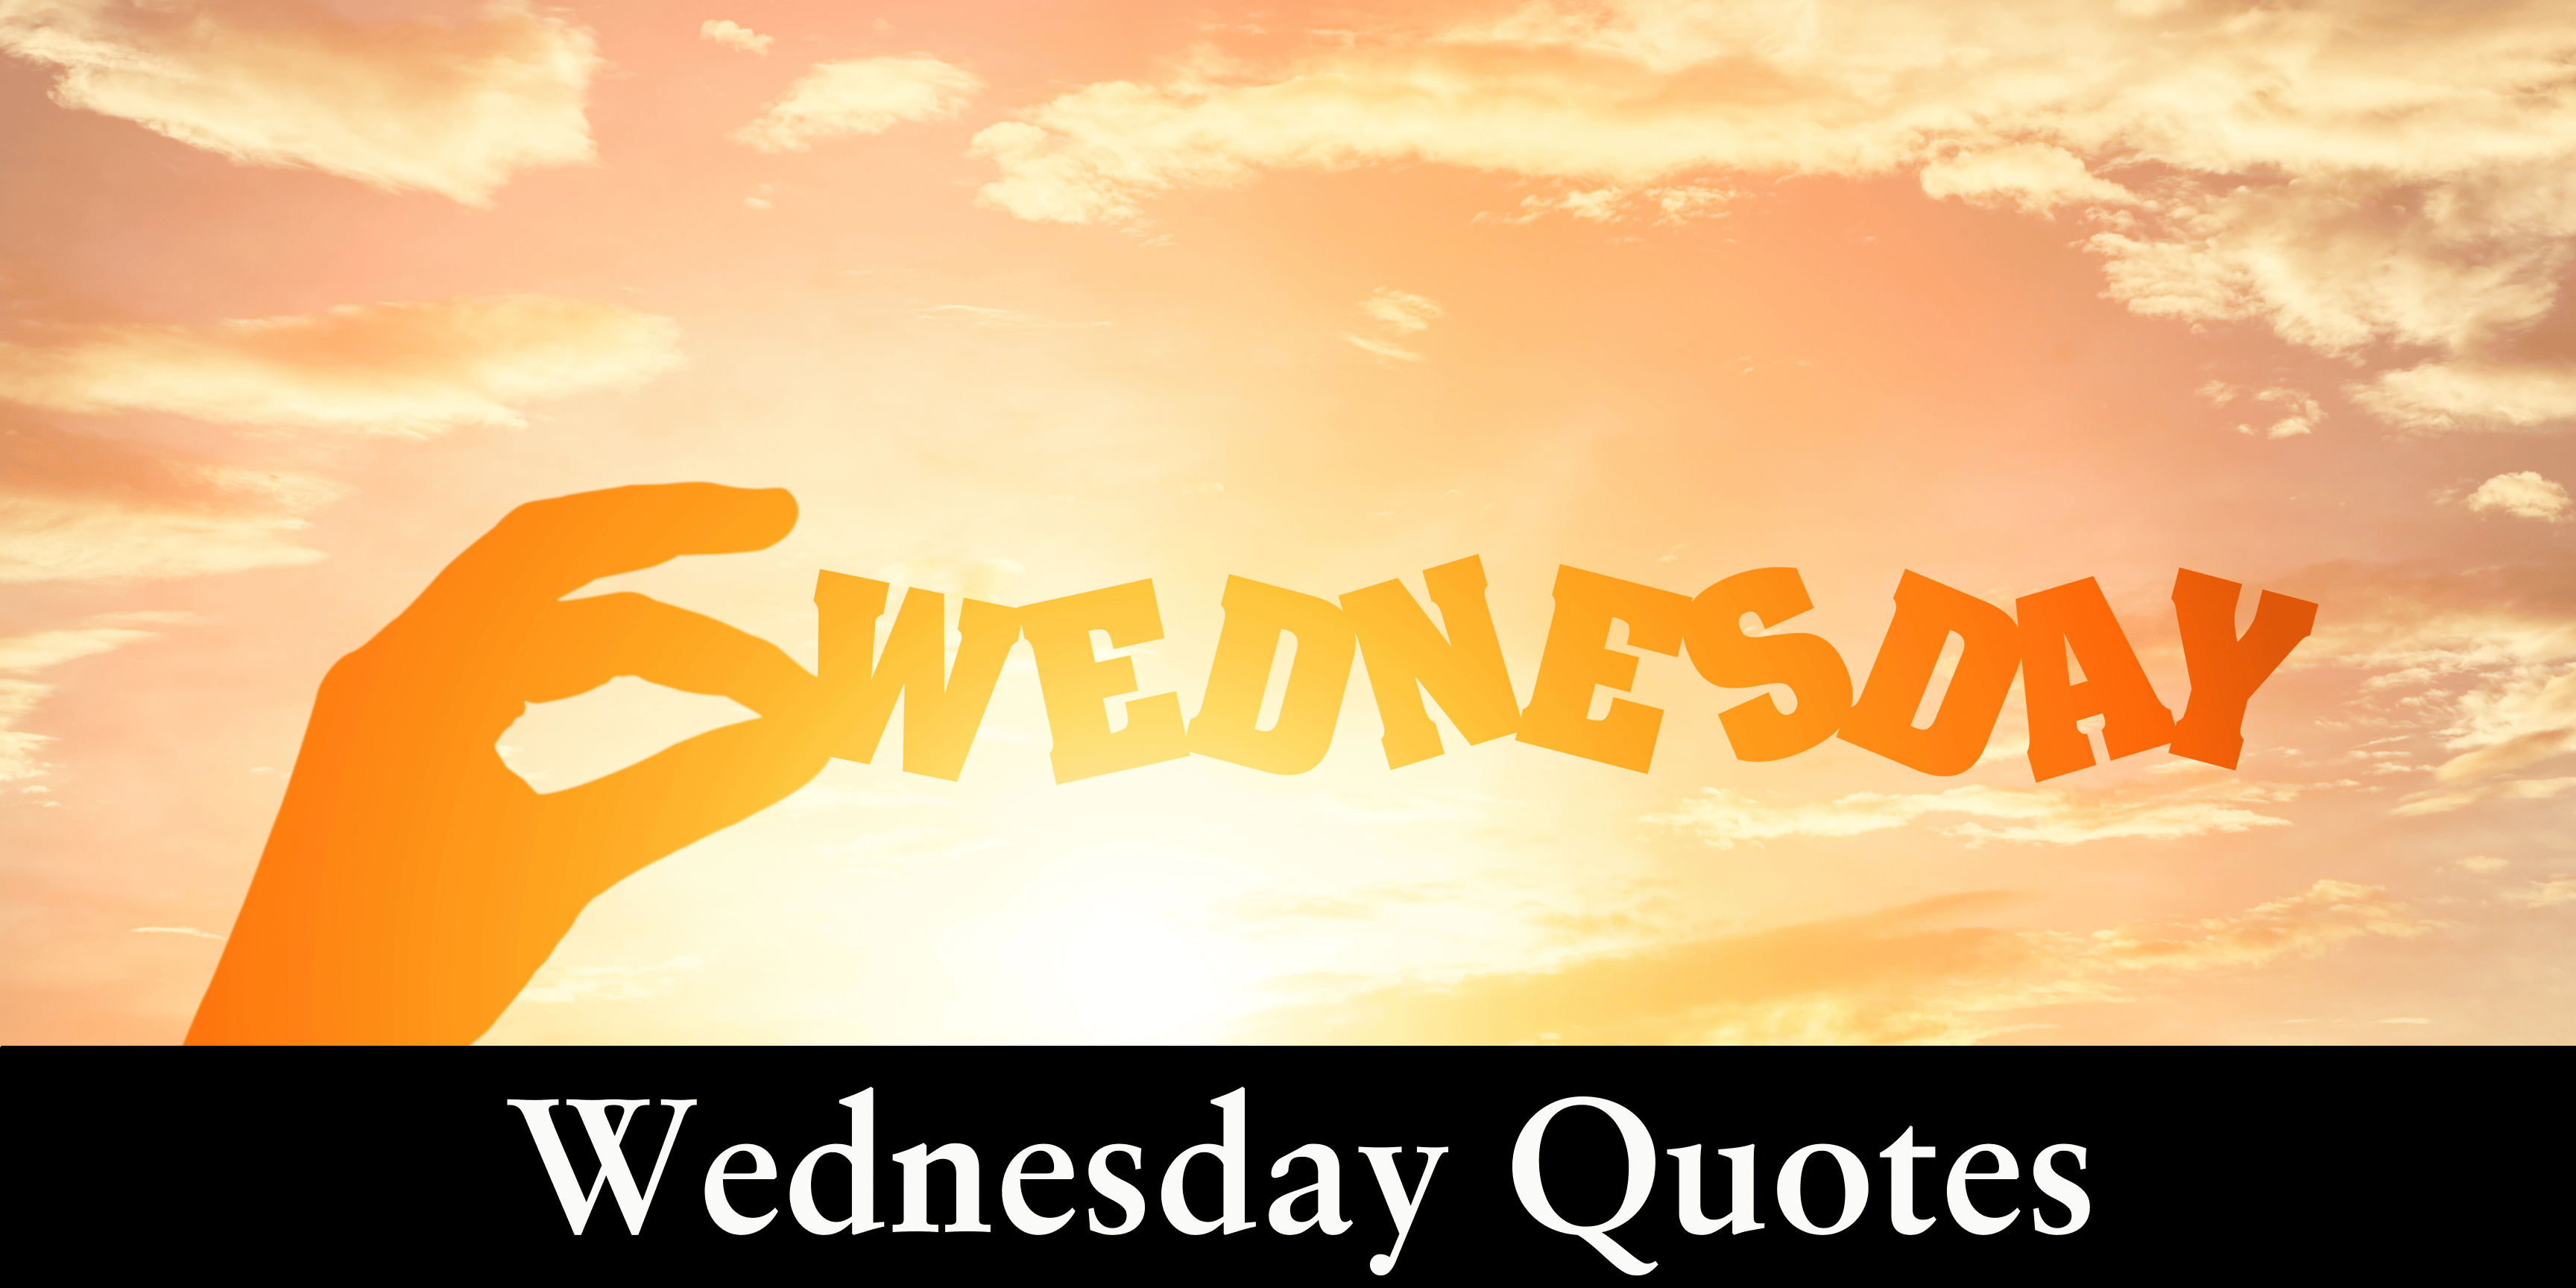 Wednesday Quotes: Midweek Inspiration and Motivation